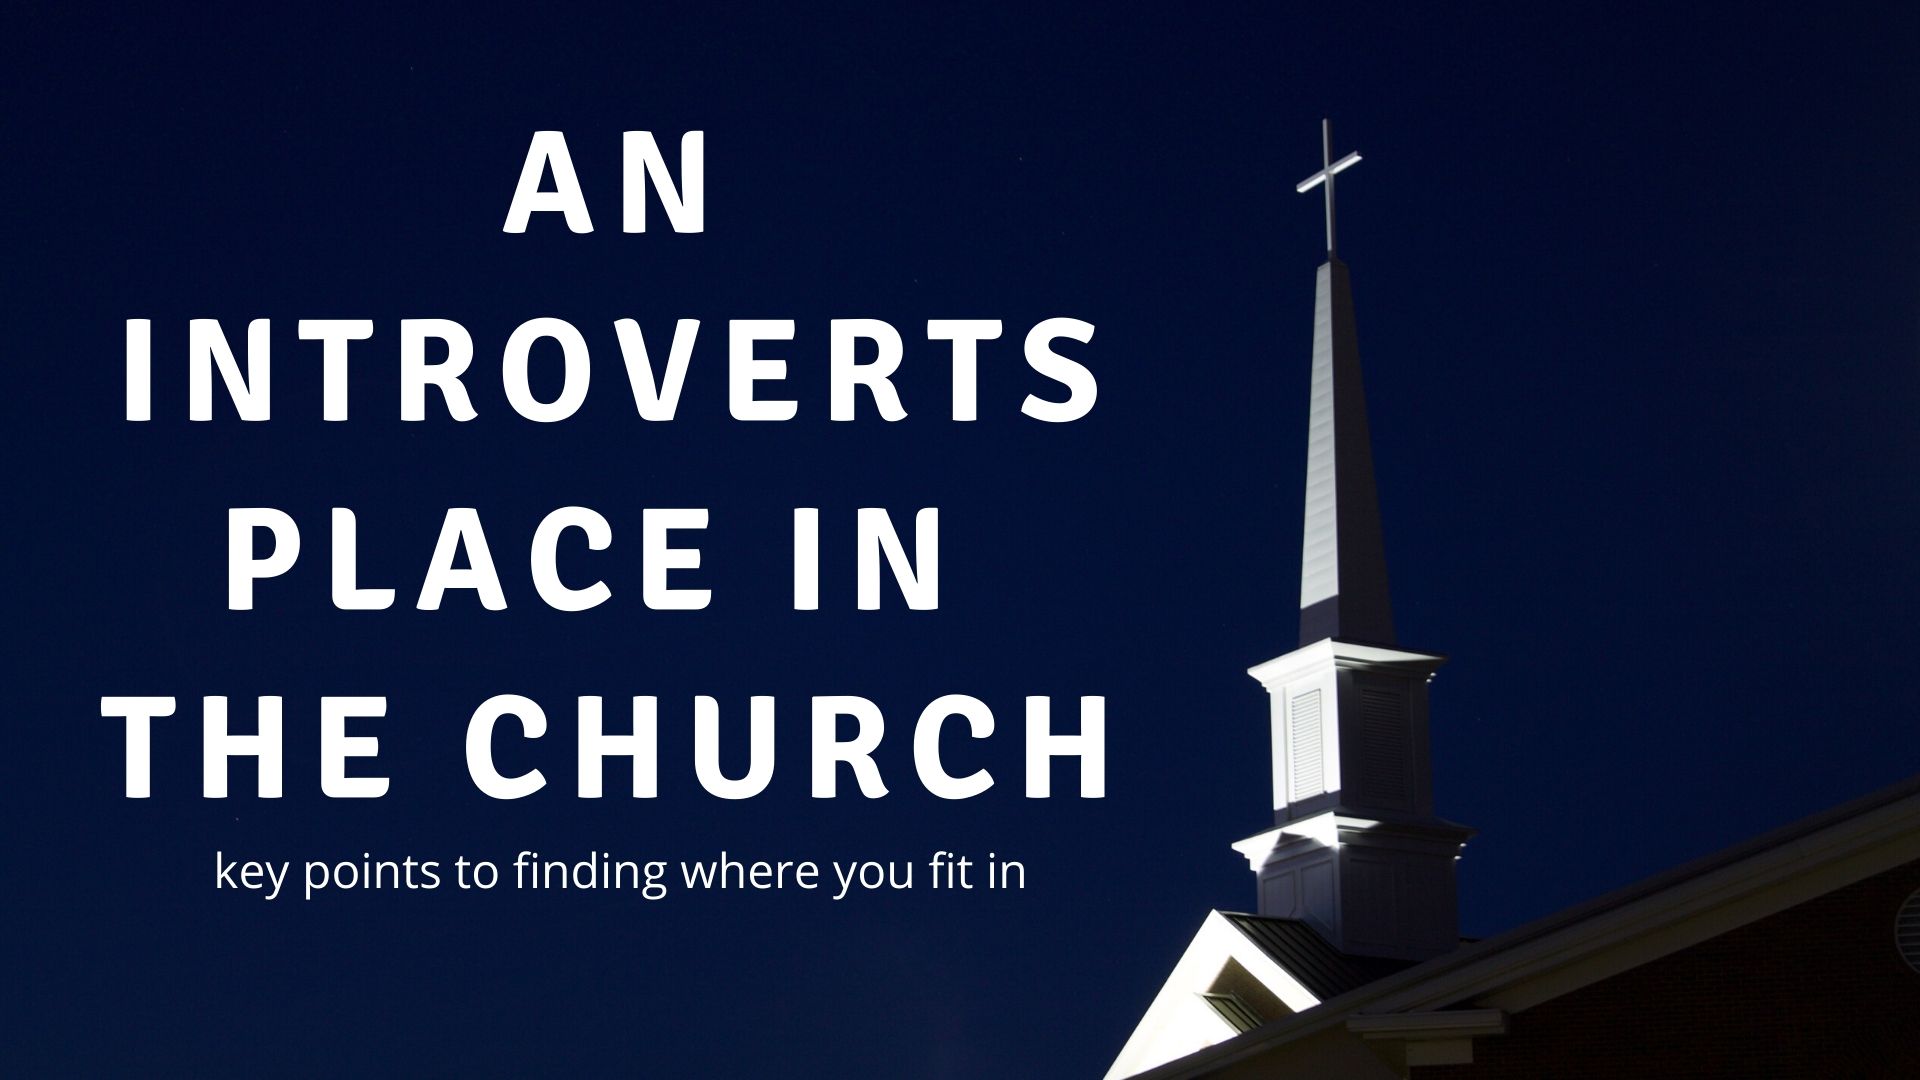 An Introverts Place in the Church â€¢ Christian Introvert